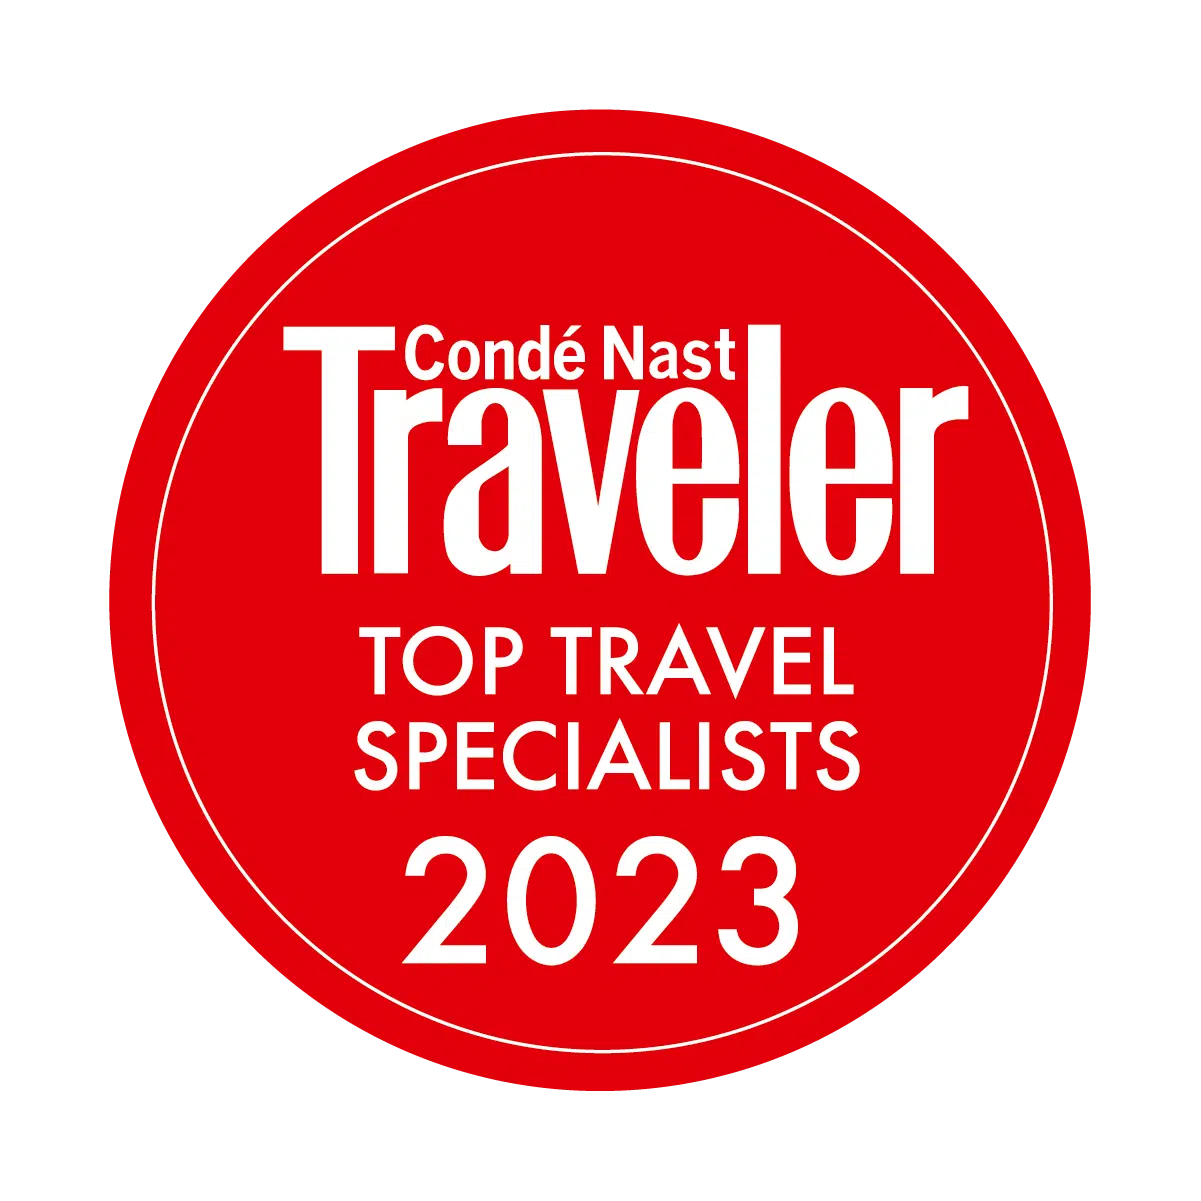 Us Travelspecialists 2023 Seal 1000x